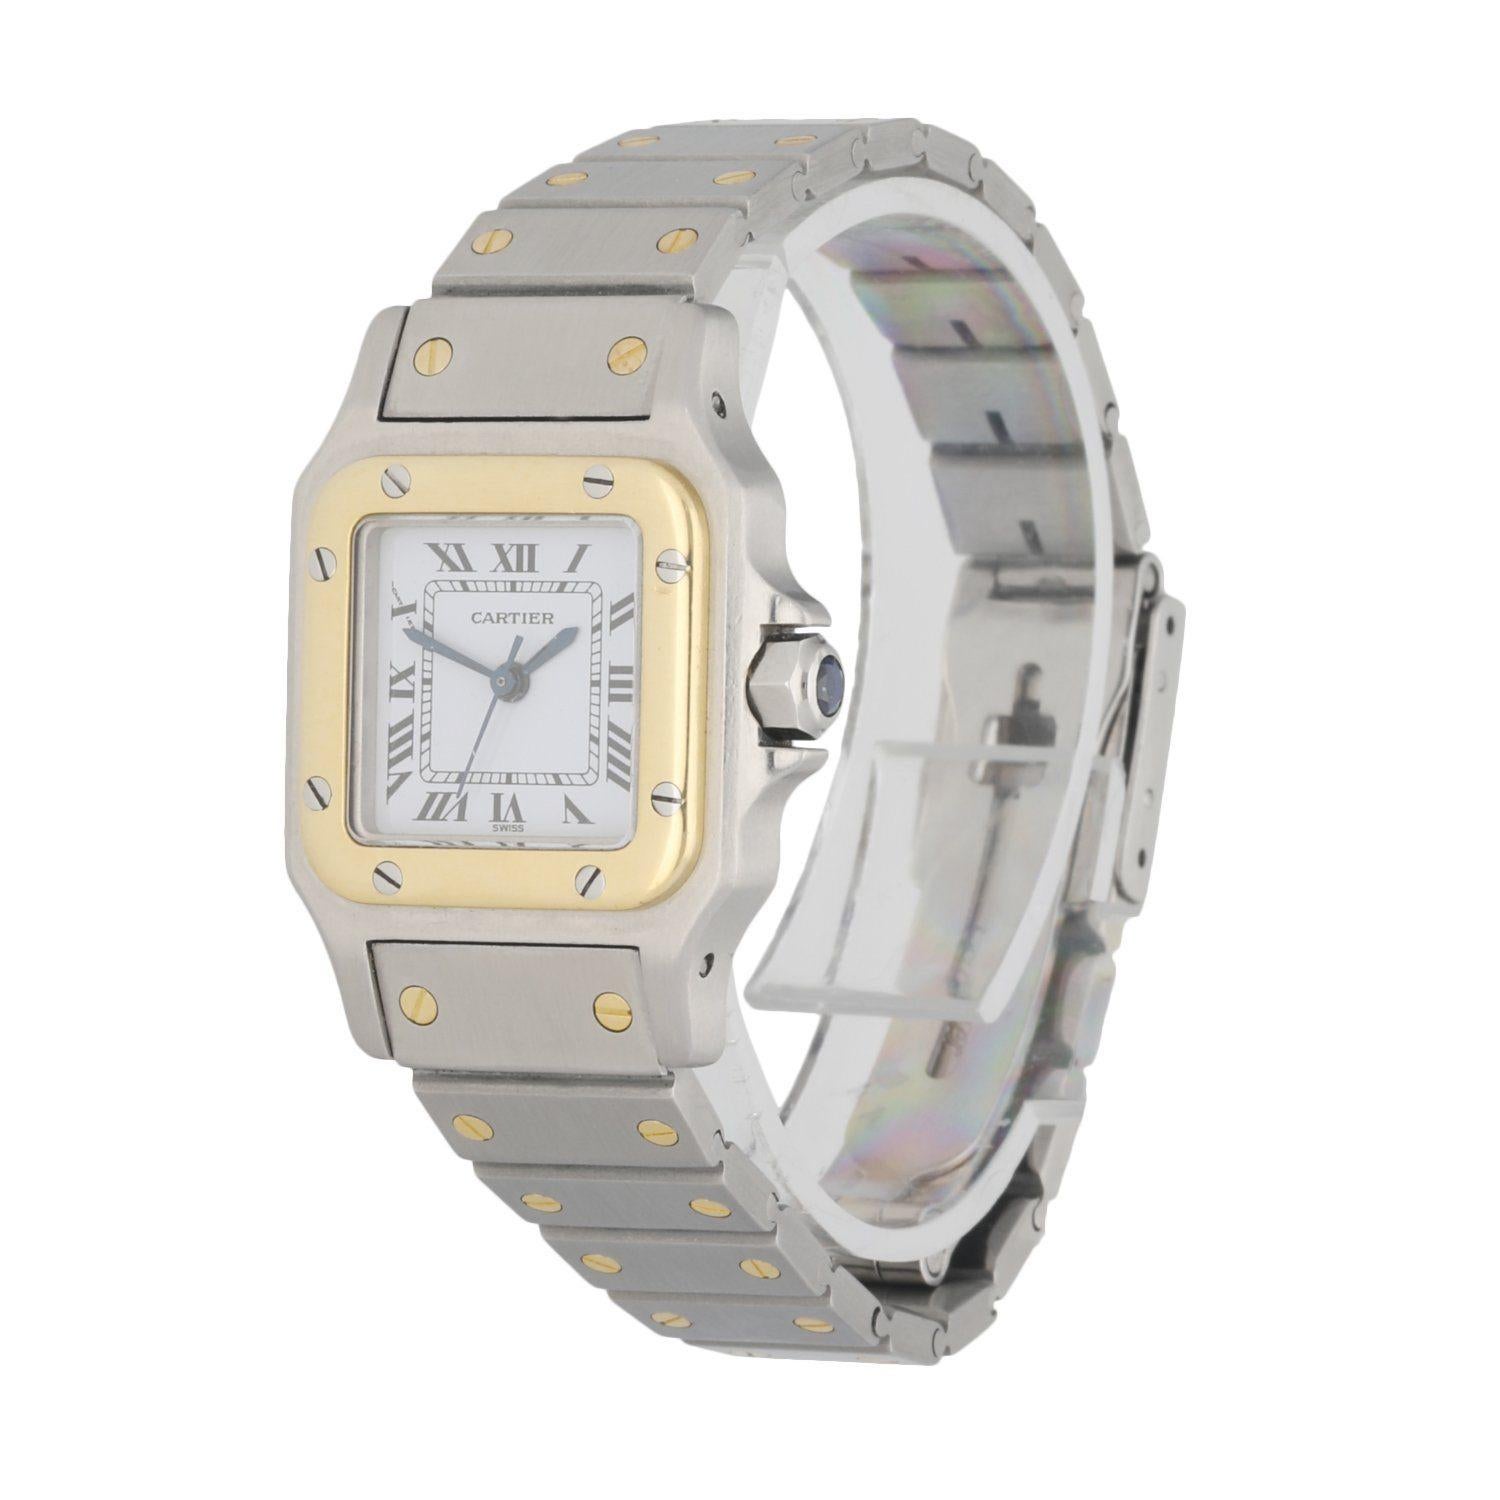 Cartier Santos GalbeeÂ ladies watch. 24mm stainless steel case. 18k yellow gold fixed bezel. White dial with blue hands and black Roman numeral hour marker. 18k yellow gold and stainless steel bracelet with hidden fold over clasp; will fit up to a